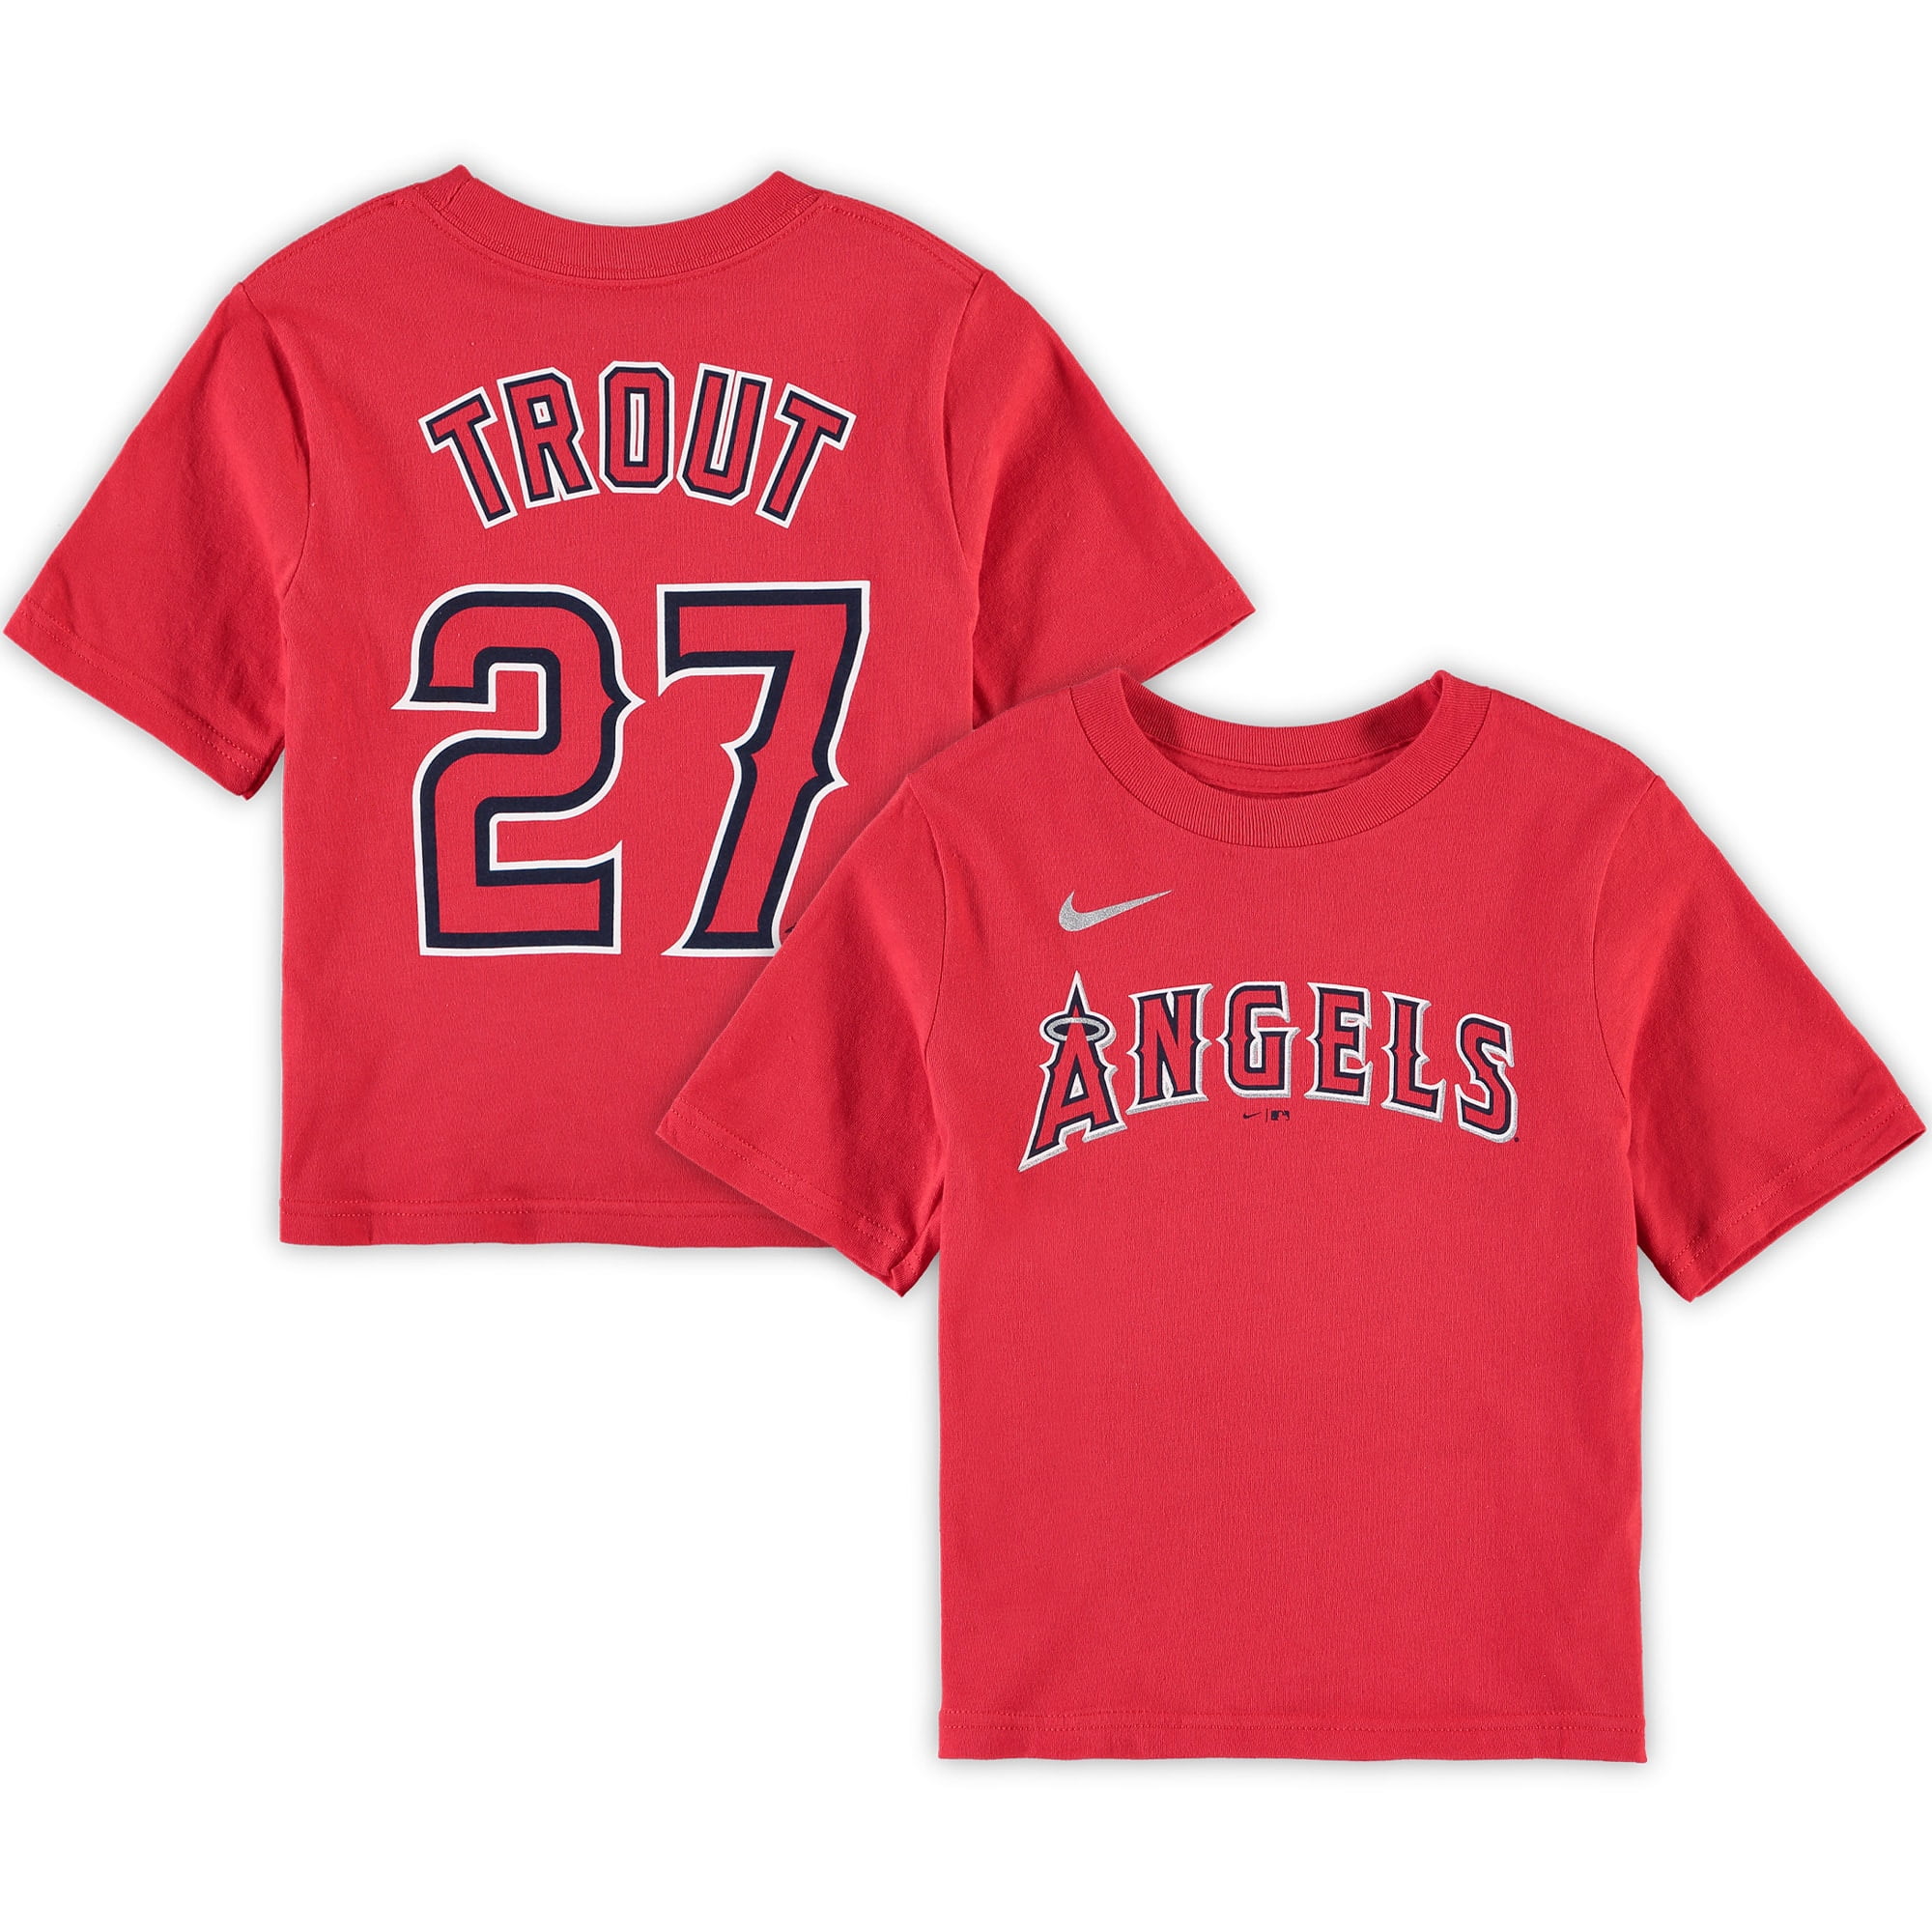 Youth Angels jersey